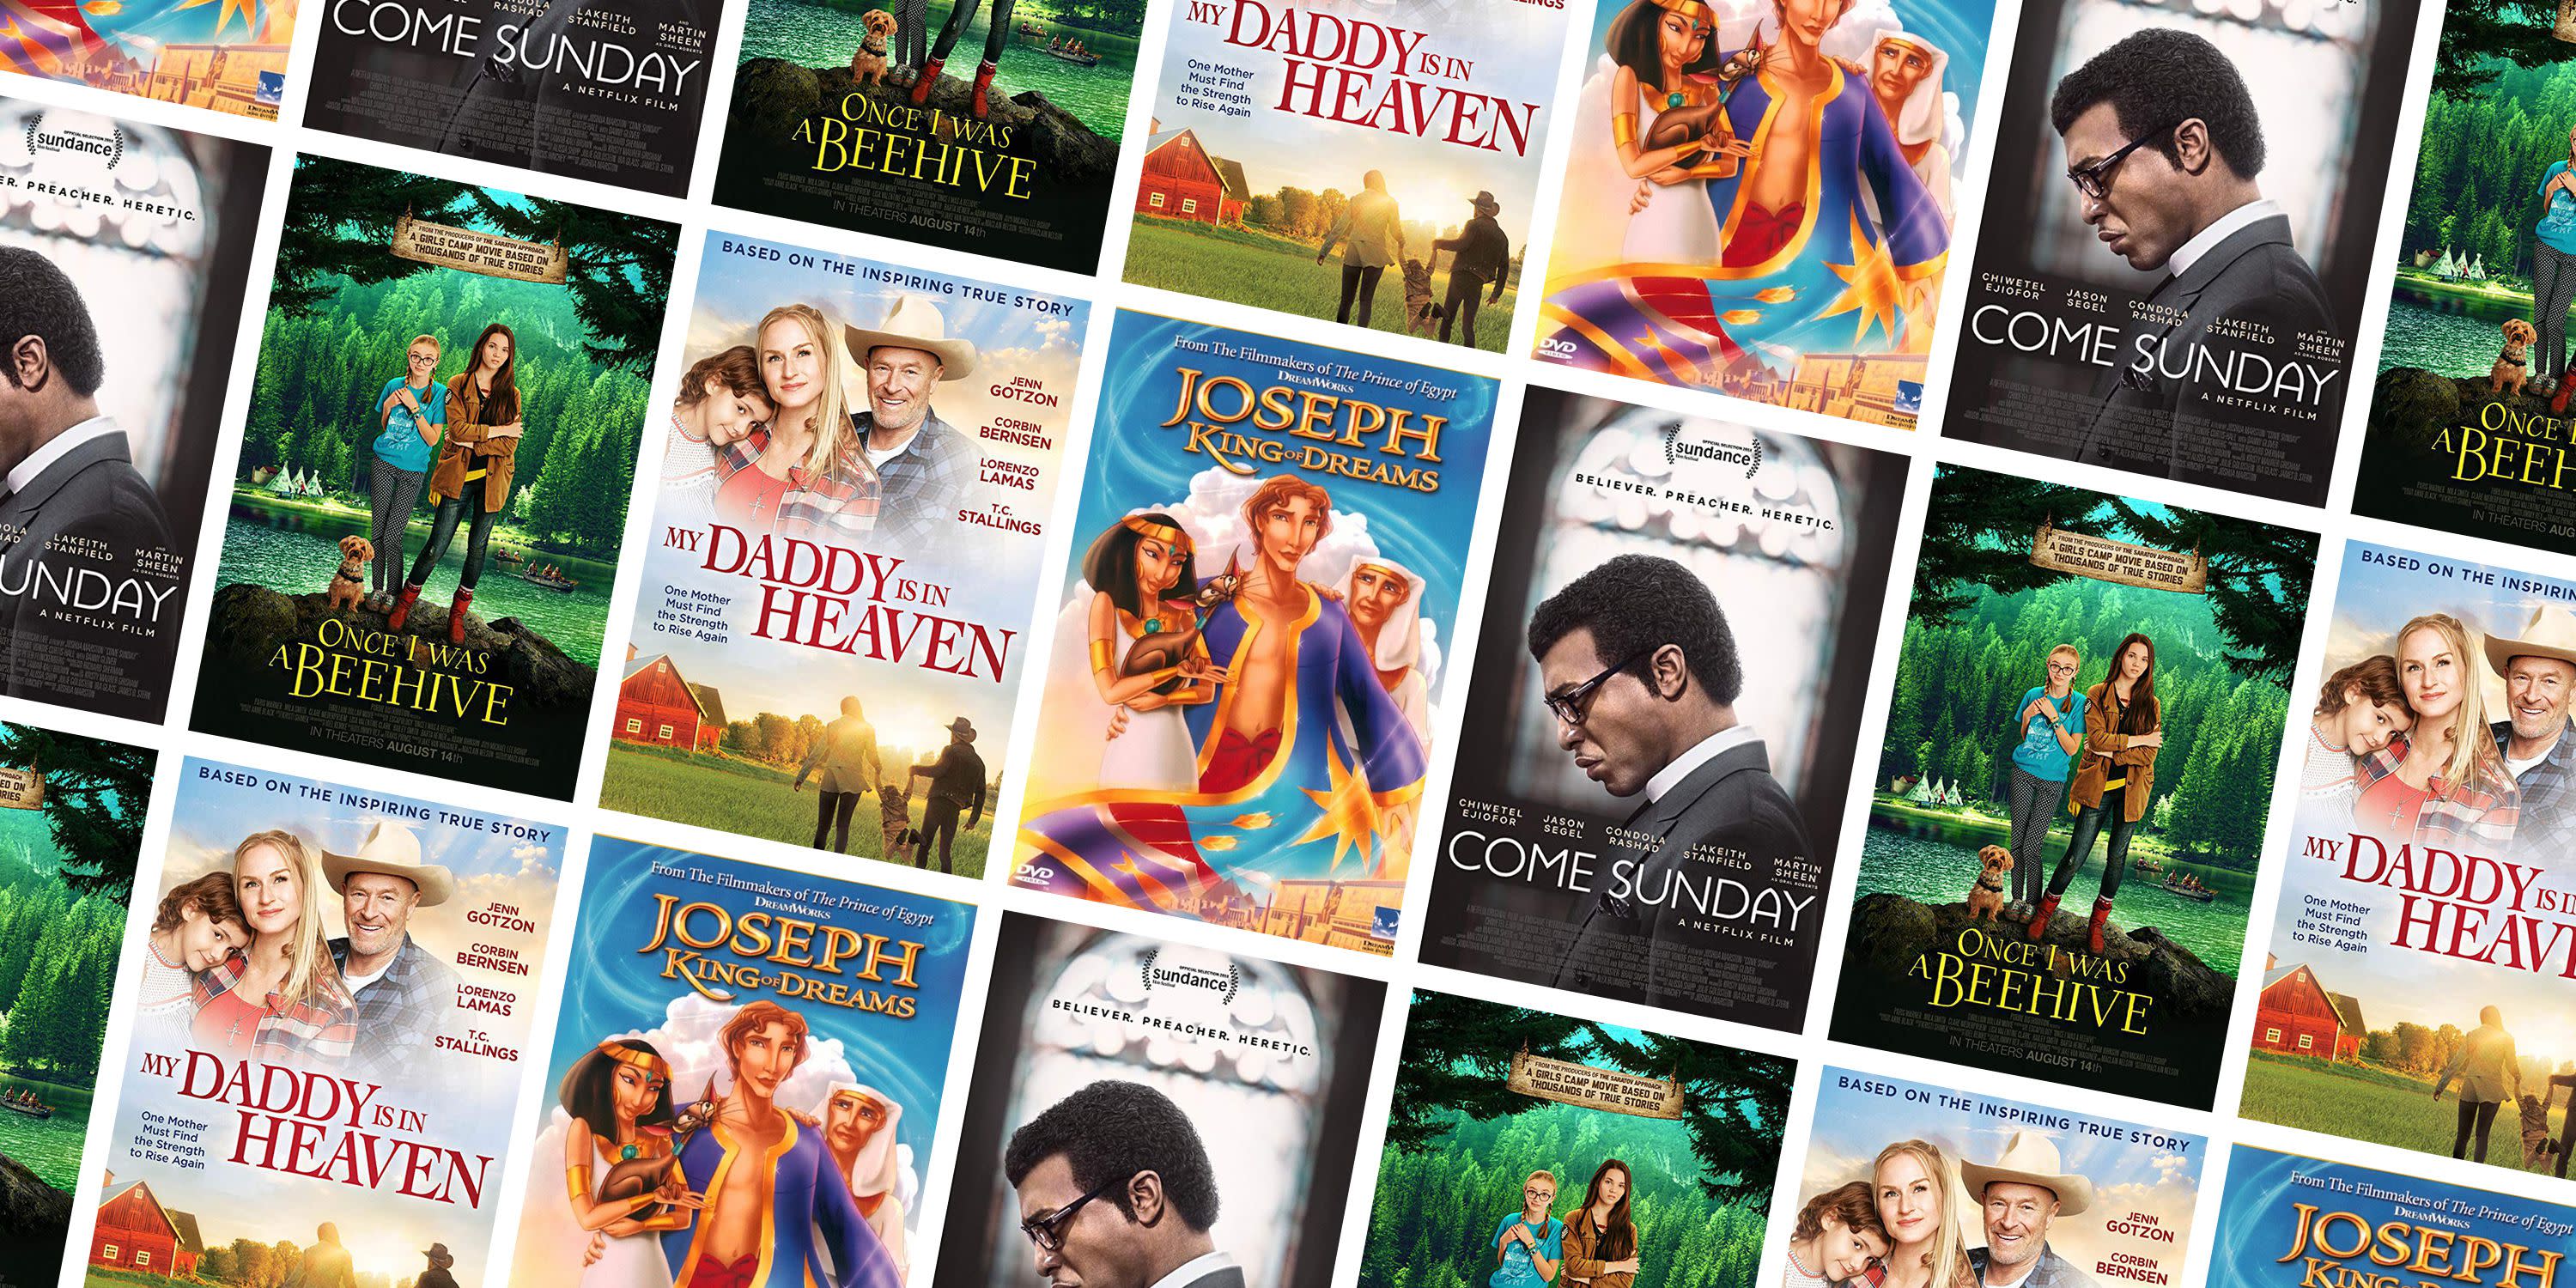 20 Inspiring Christian Movies To Watch On Netflix With Your Family